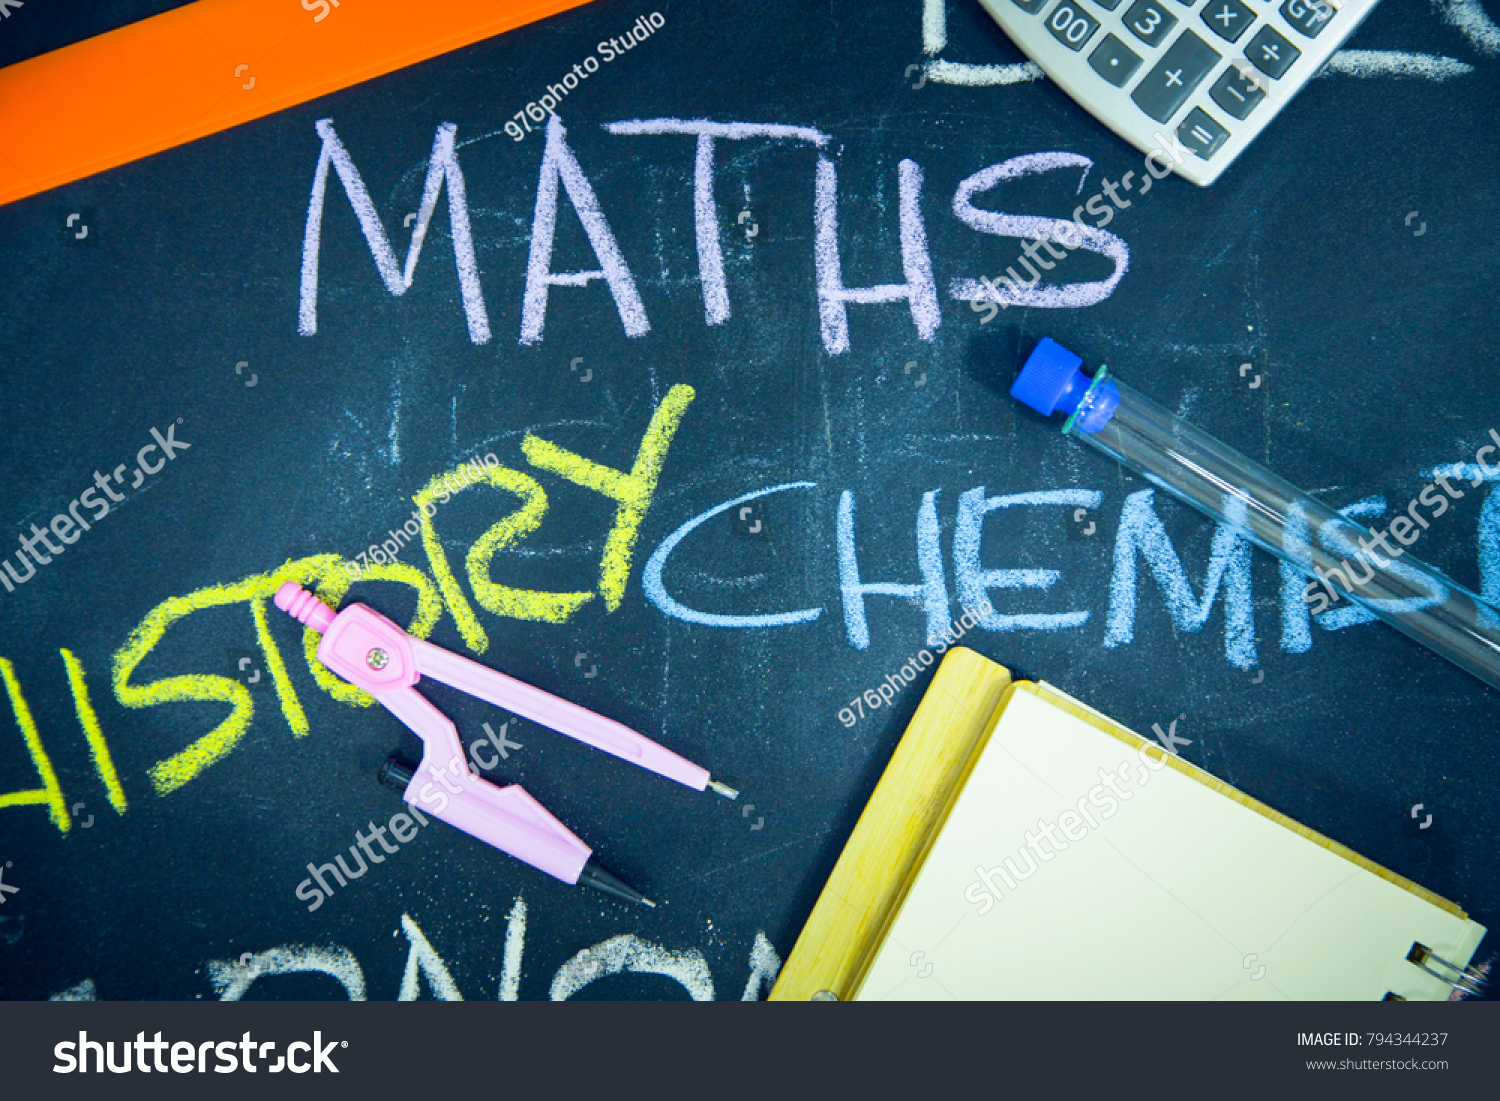 Education concept: Names of school subjects inscribed on a black chalkboard with colored chalks and stationary, close up, top view #794344237